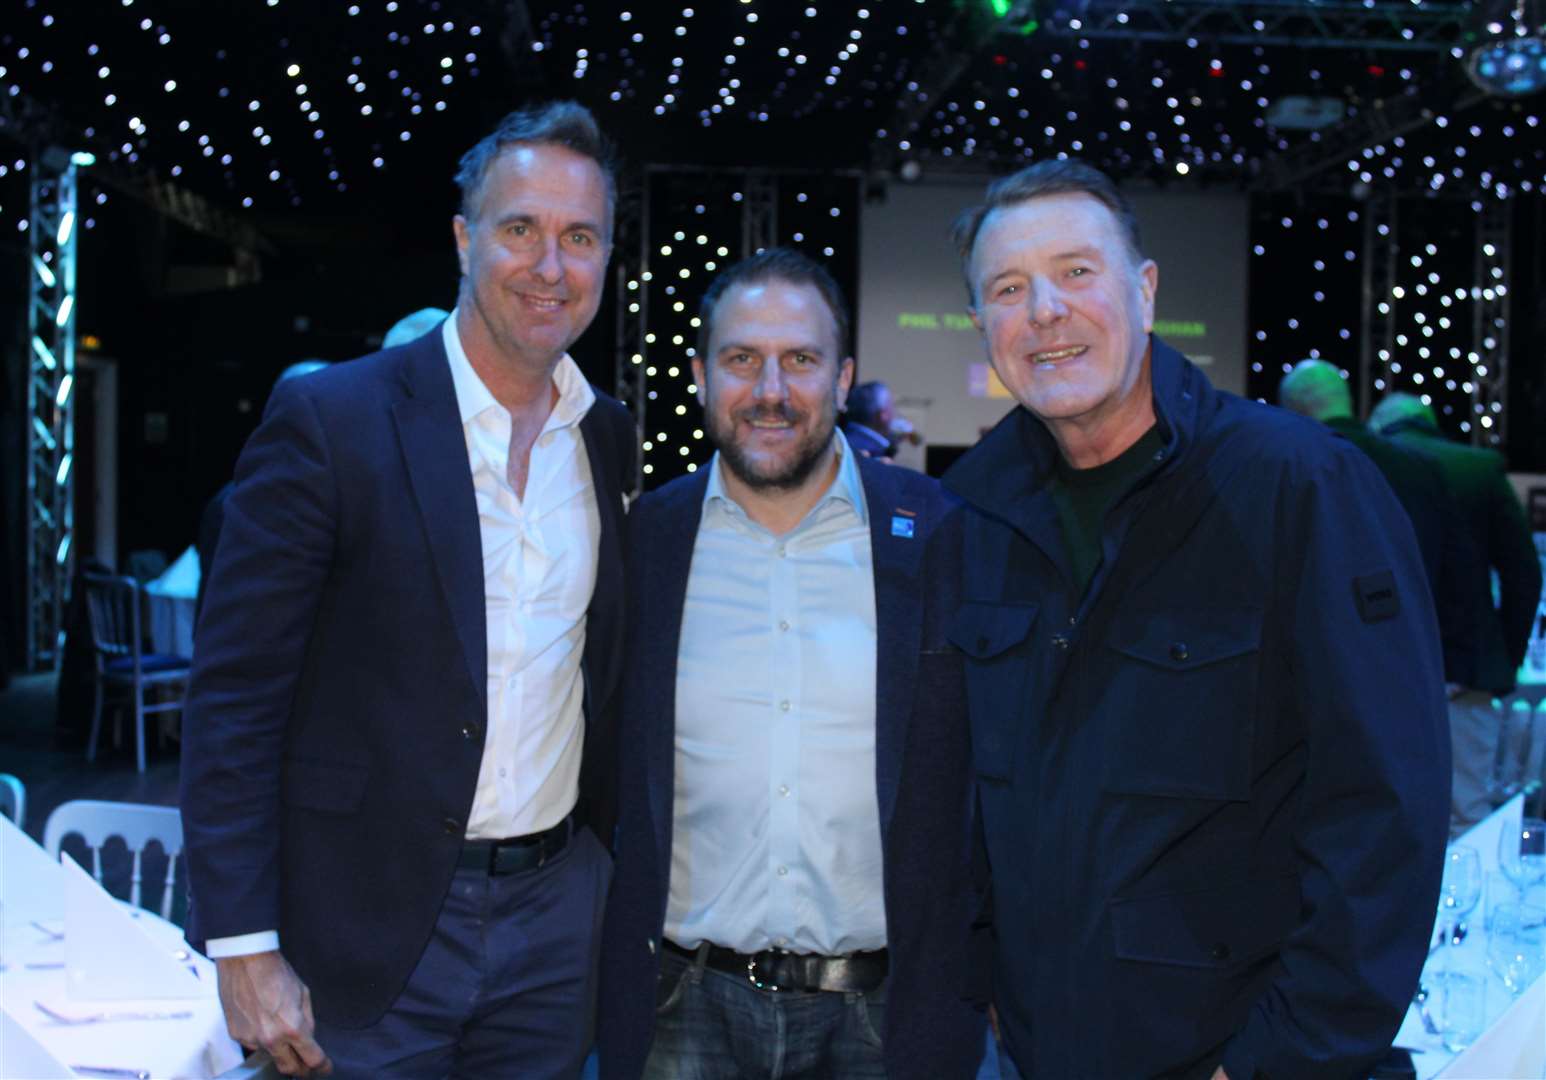 Michael Vaughan, Olly Magnus and Phil Tufnell at the charity lunch in Ipswich. Picture: Nick Garnham